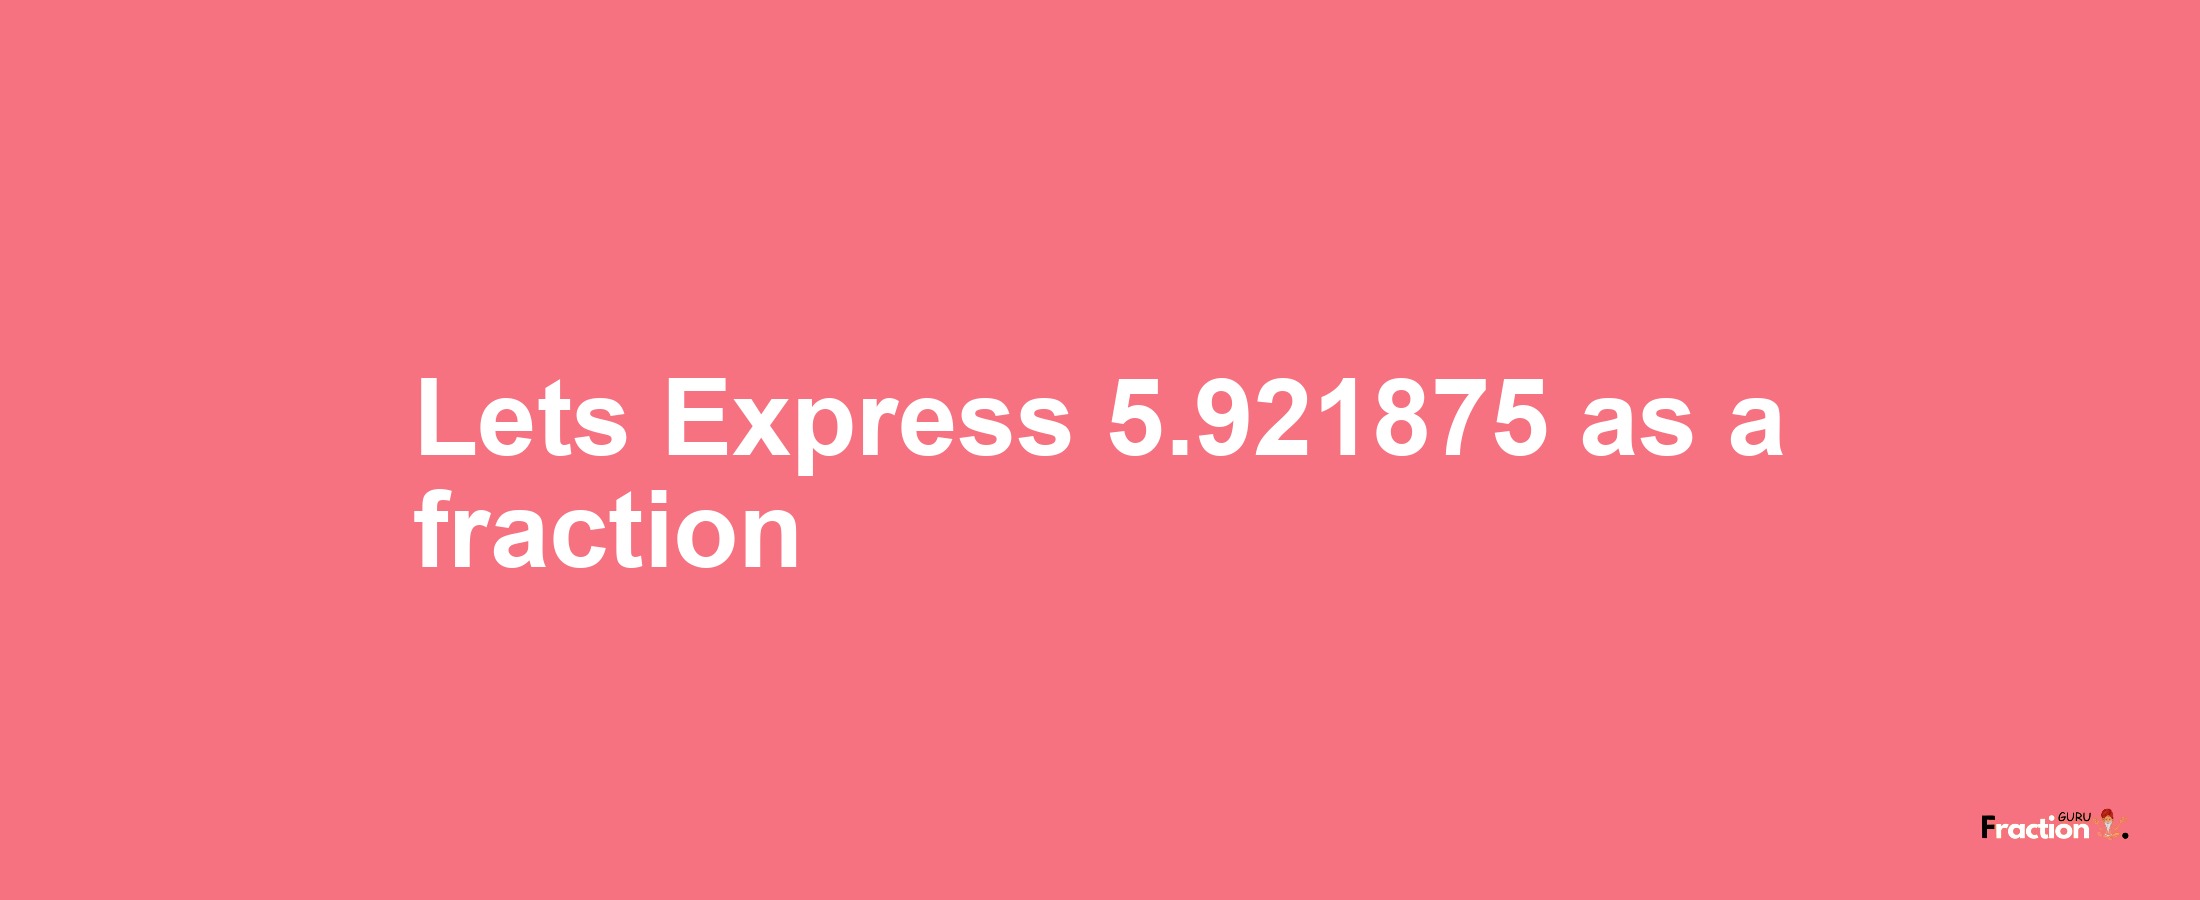 Lets Express 5.921875 as afraction